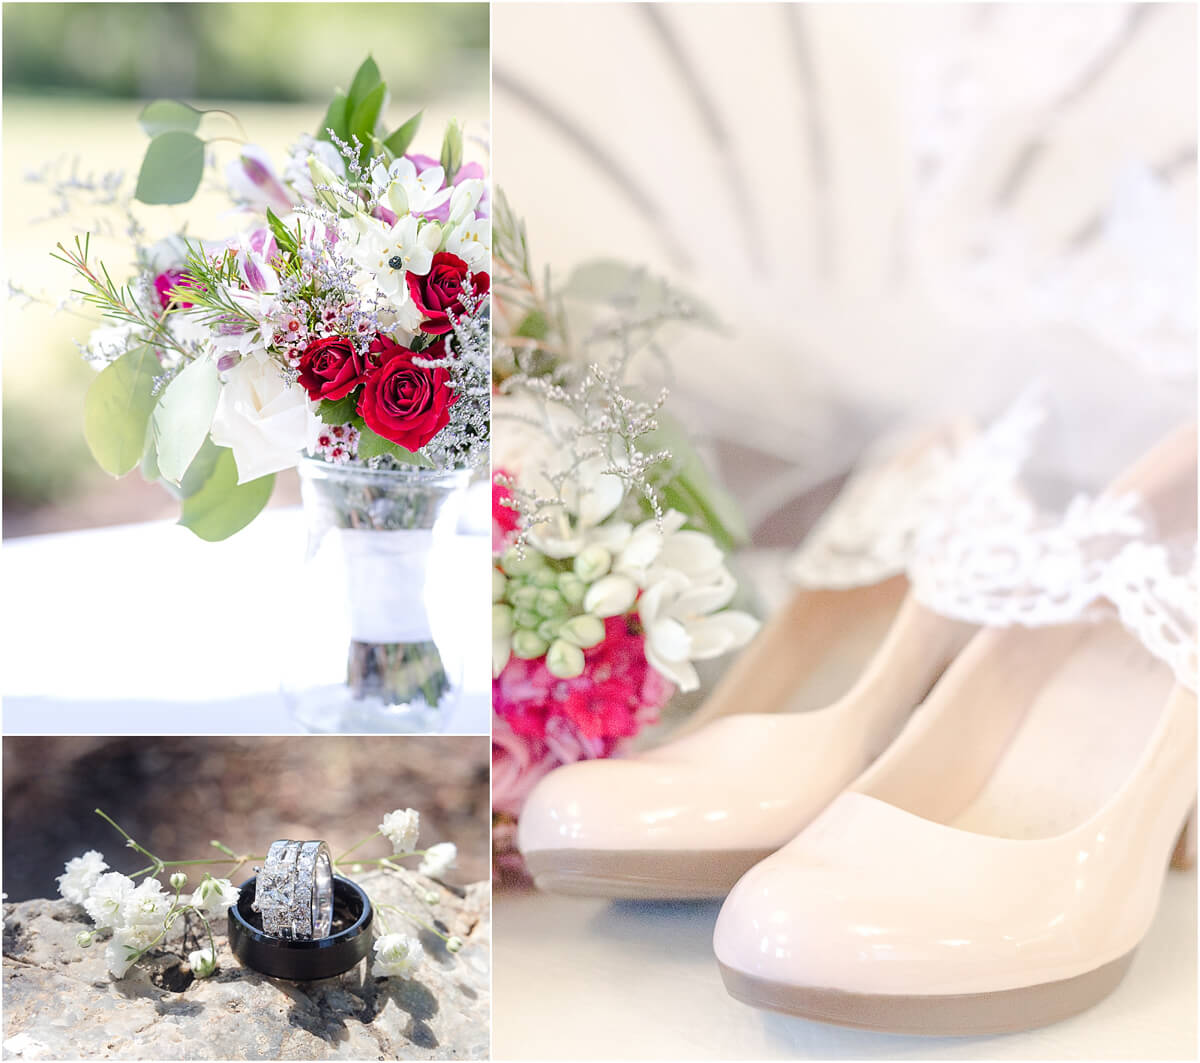 Bridal details - bouquet, shoes, and rings